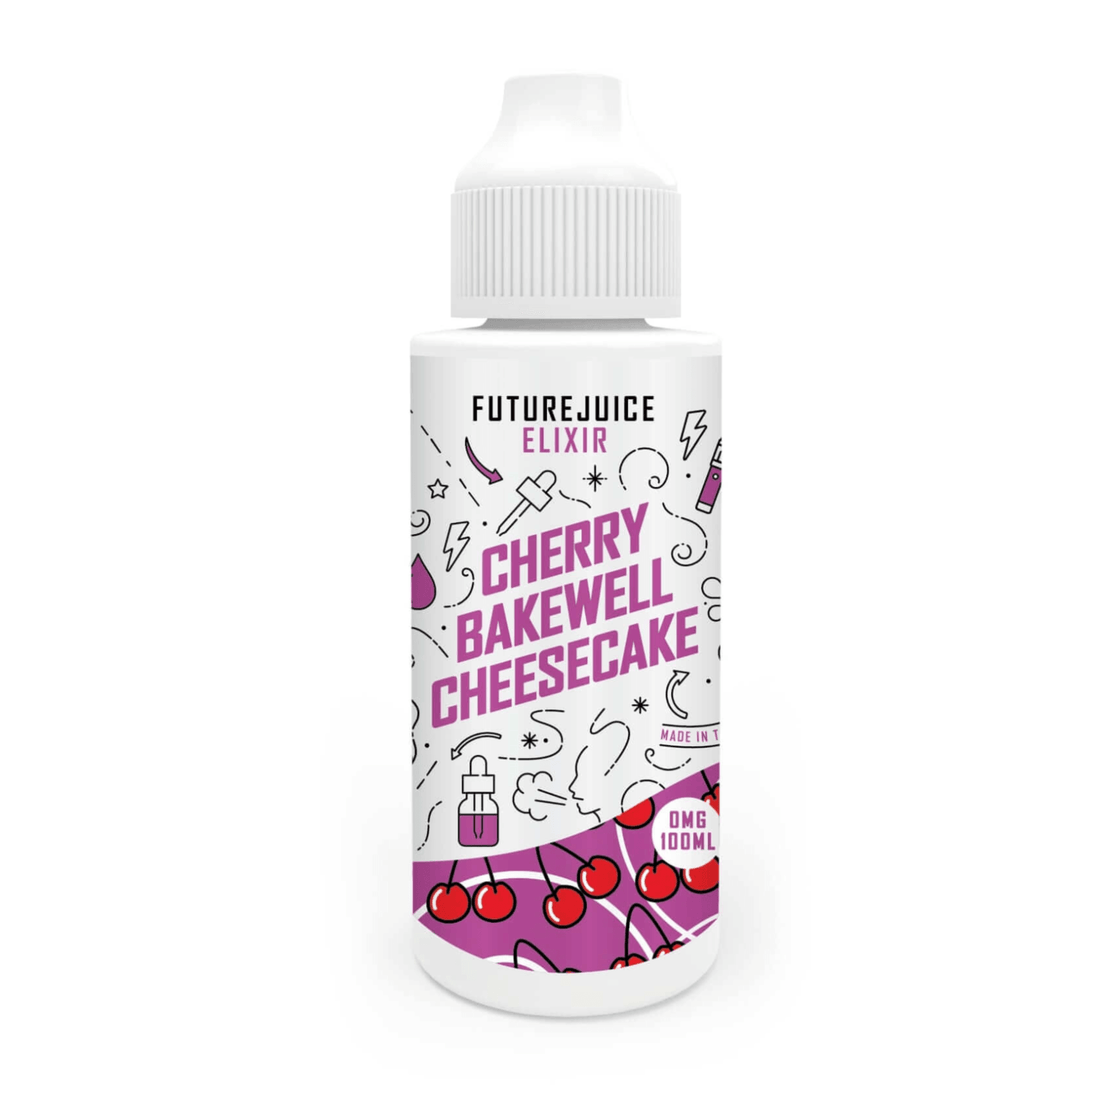 CHERRY BAKEWELL CHEESECAKE 100ML SHORT FILL E-LIQUID BY FUTURE JUICE - Vapeslough